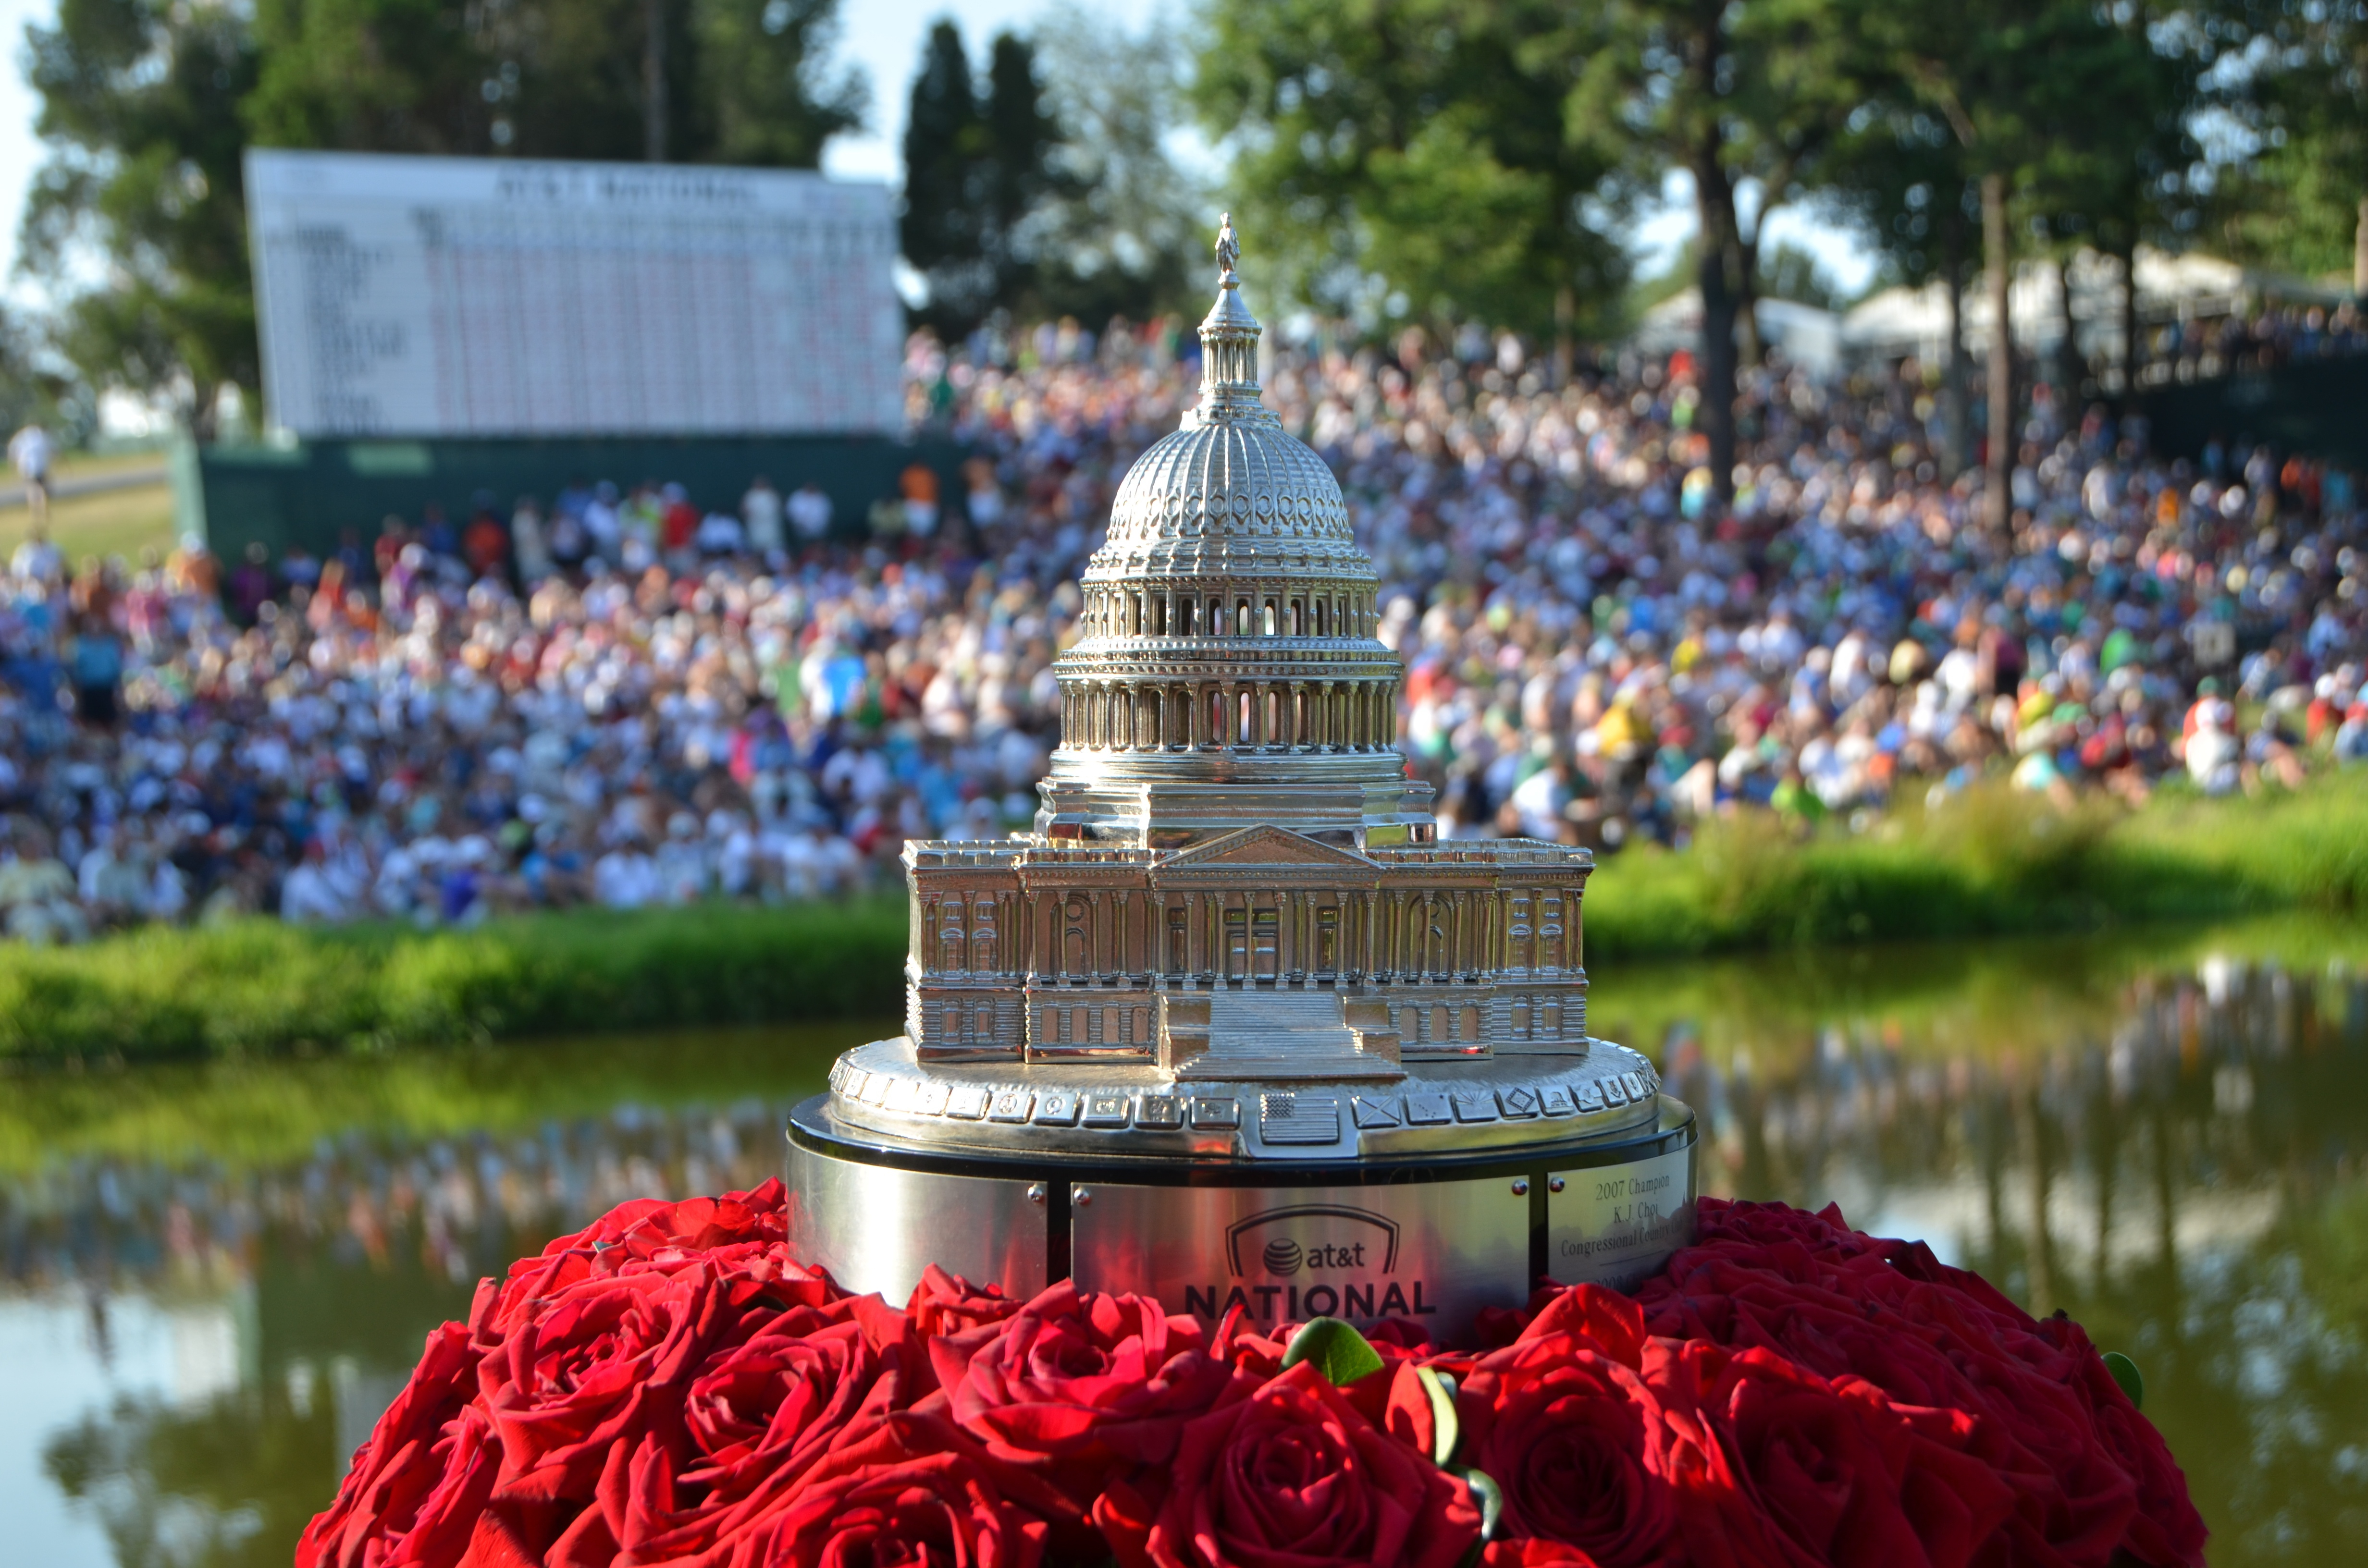 The National (AT&T National, Quicken Loans National) Capitol Building trophy made by Malcolm DeMille